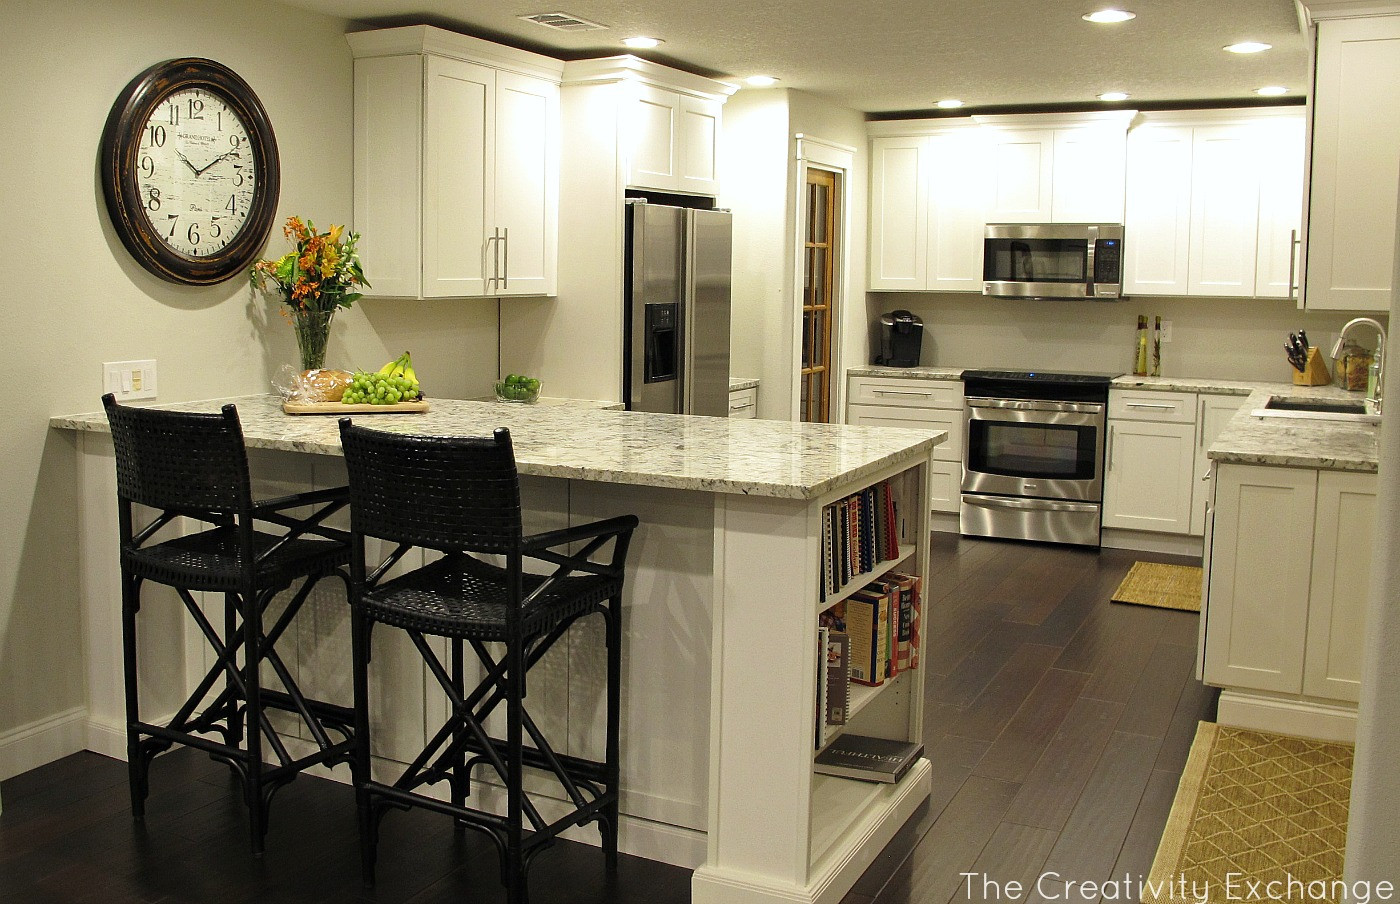 Kitchen Remodel Ideas Before And After
 Cousin Frank s Amazing Kitchen Remodel Before & After